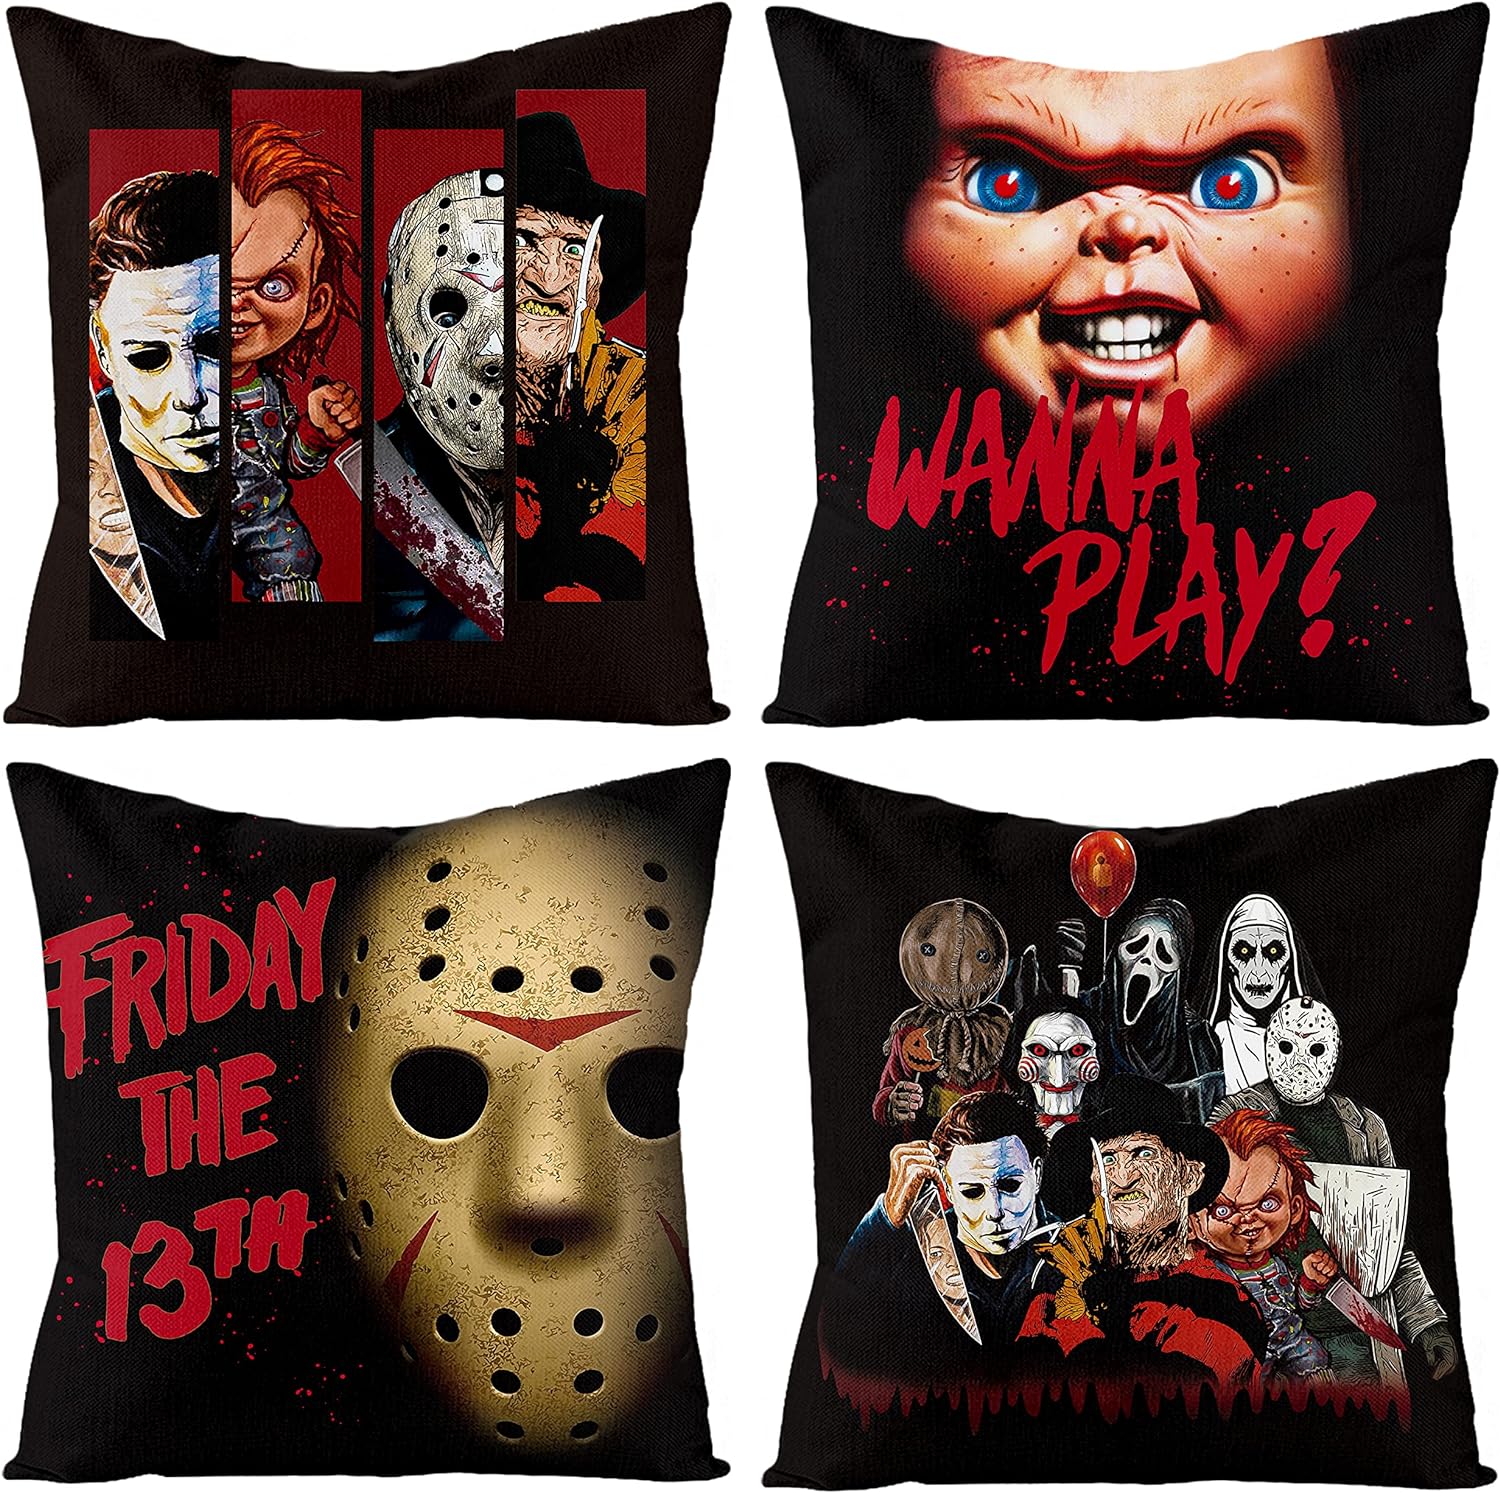 4Pcs Horror Classic Movie Characters Pillow Covers, 18 x 18 Inch Halloween Friday The 13th Throw Pillow Case Linen Decorative Square Cushion Covers for Horror Theme Party Decor Birthday Gift